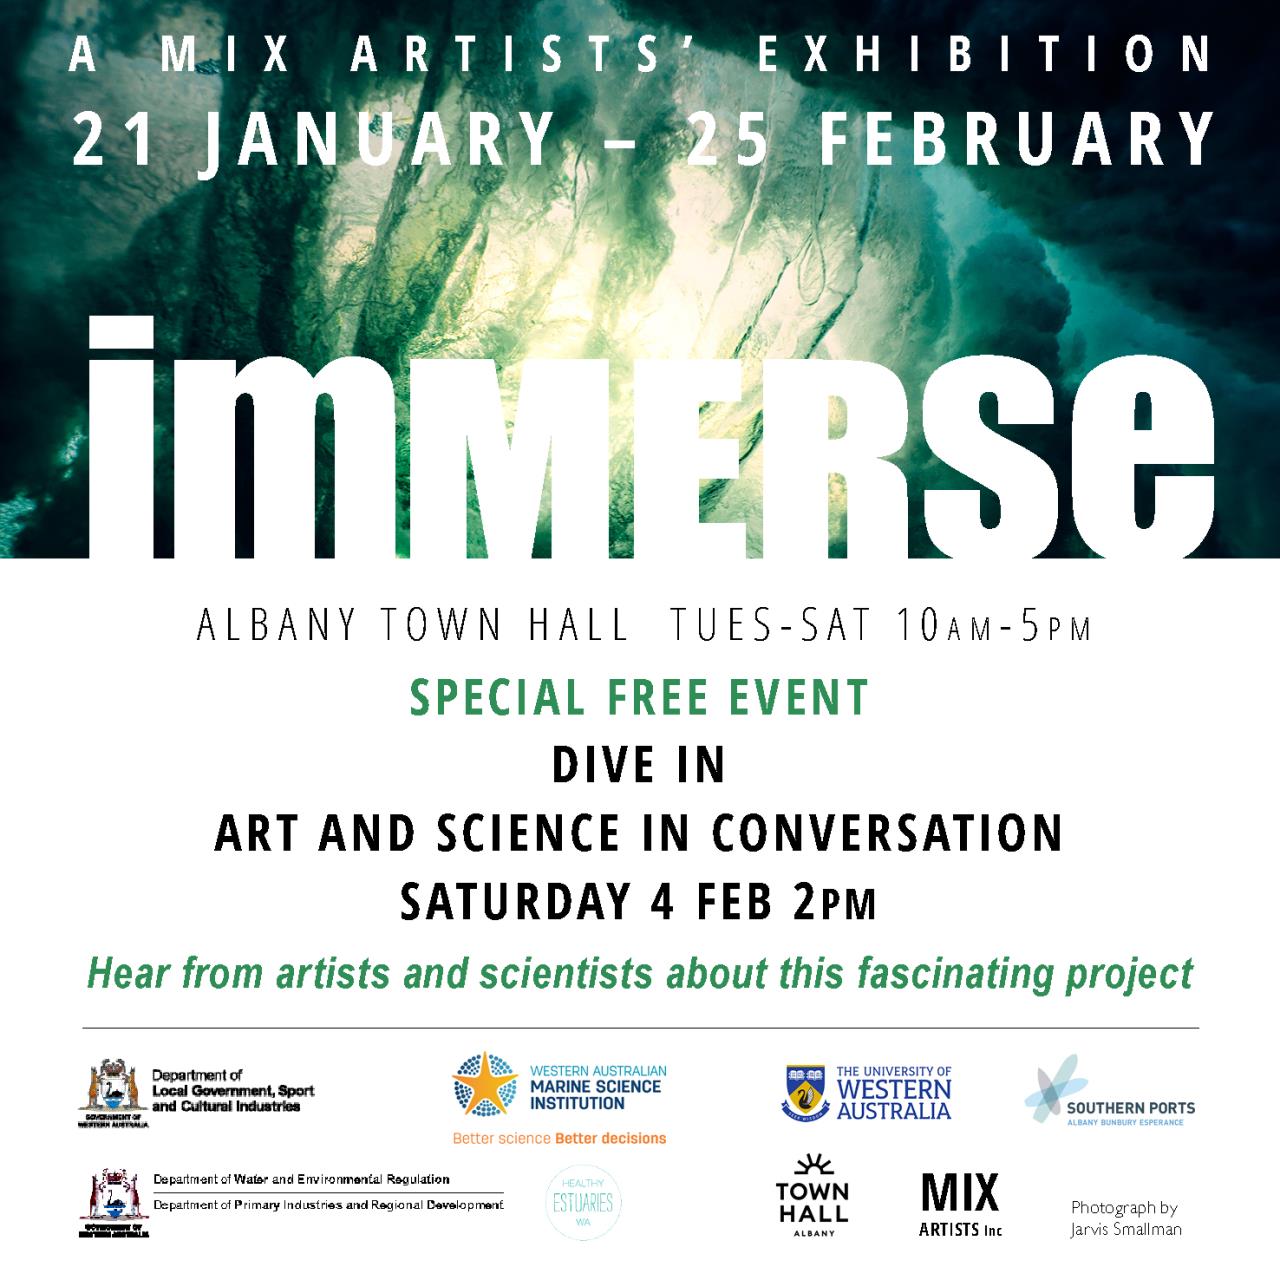 DIVE IN - ART AND SCIENCE IN CONVERSATION